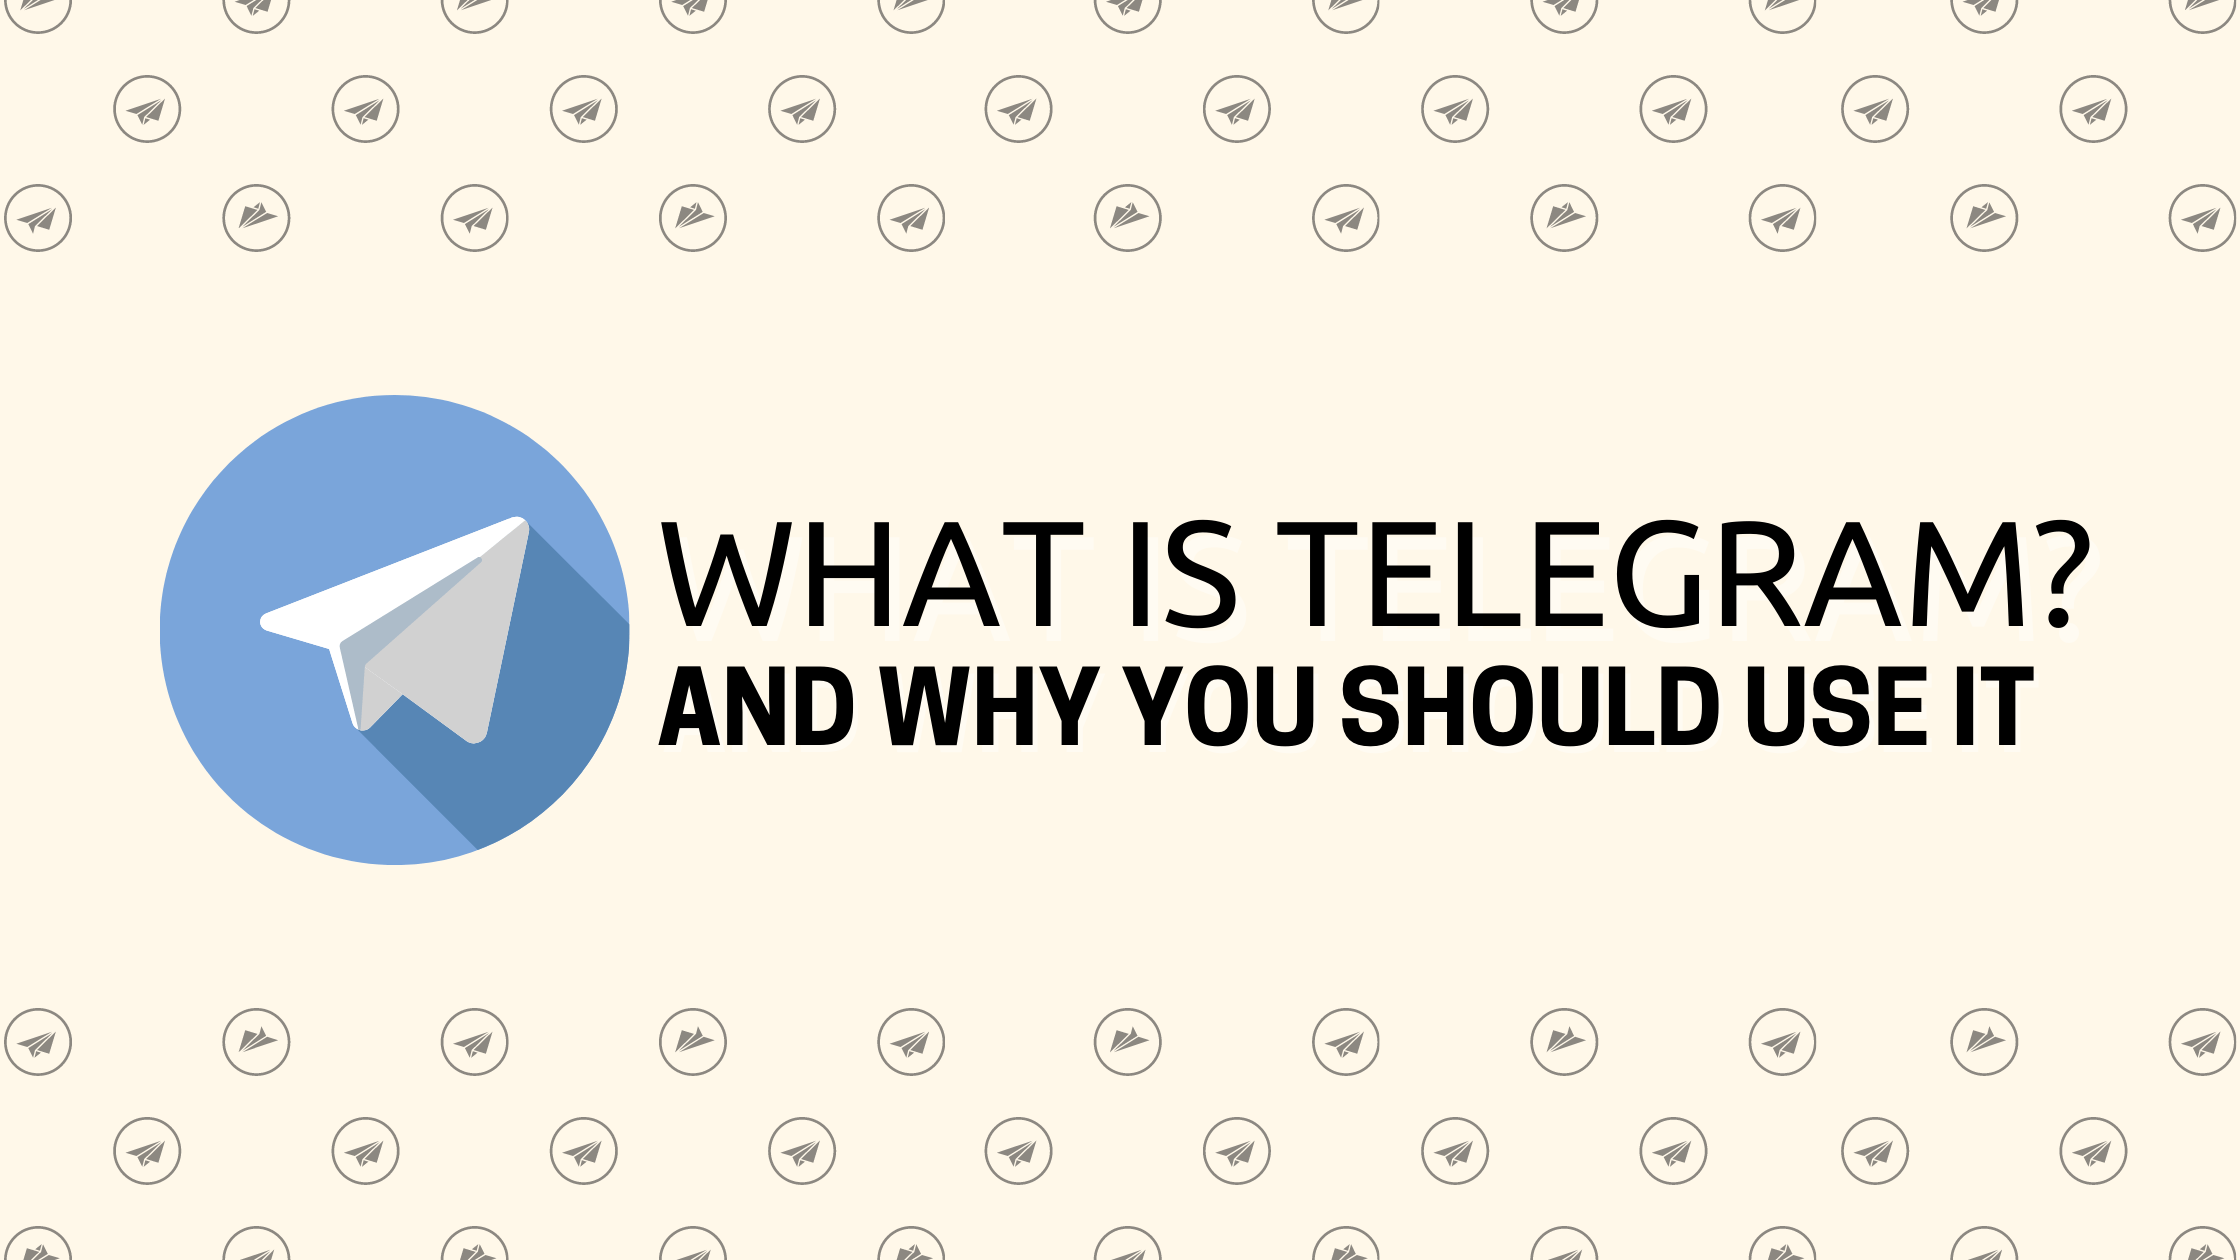 What is Telegram Marketing and How to Get Started Getting Customers from Telegram?